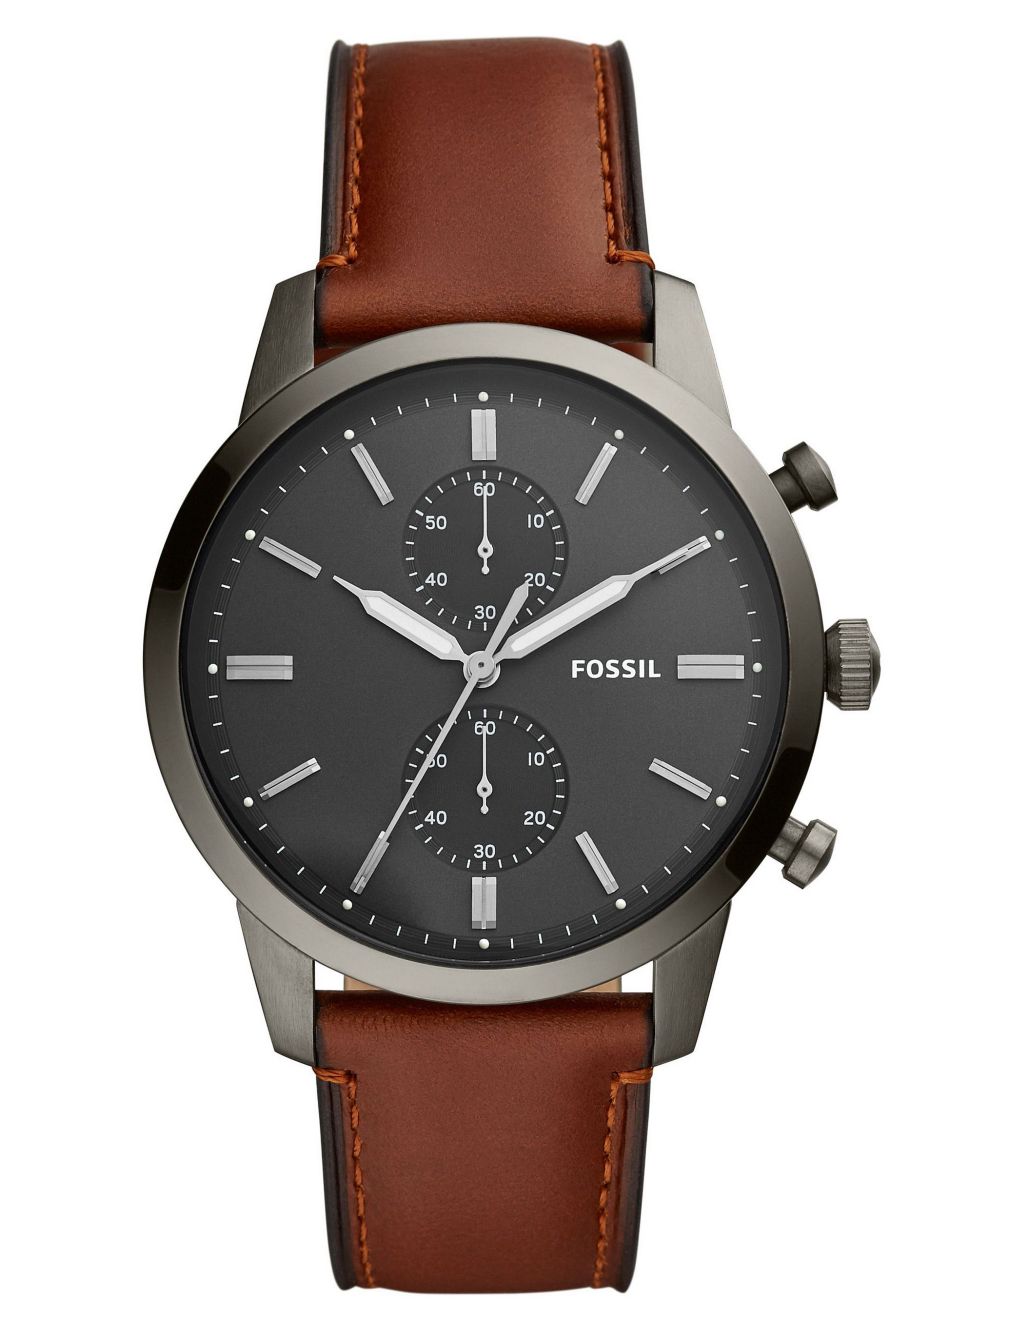 Fossil Townsman Brown Leather Watch image 1